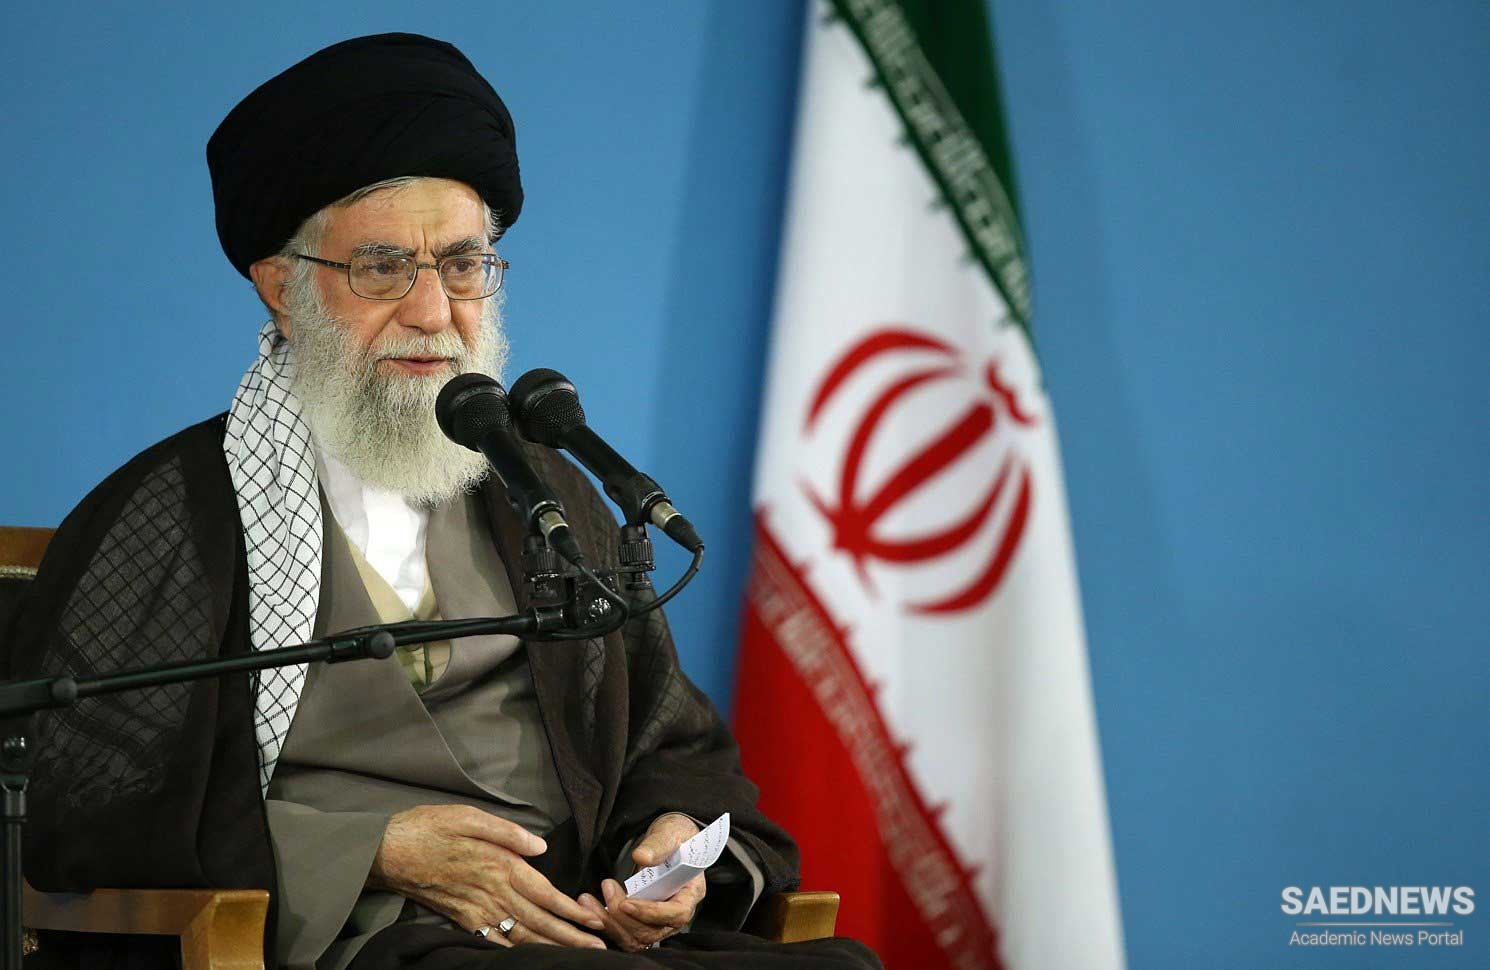 Leader: Countries run based on tribalism, say Iran's elections are not democratic!